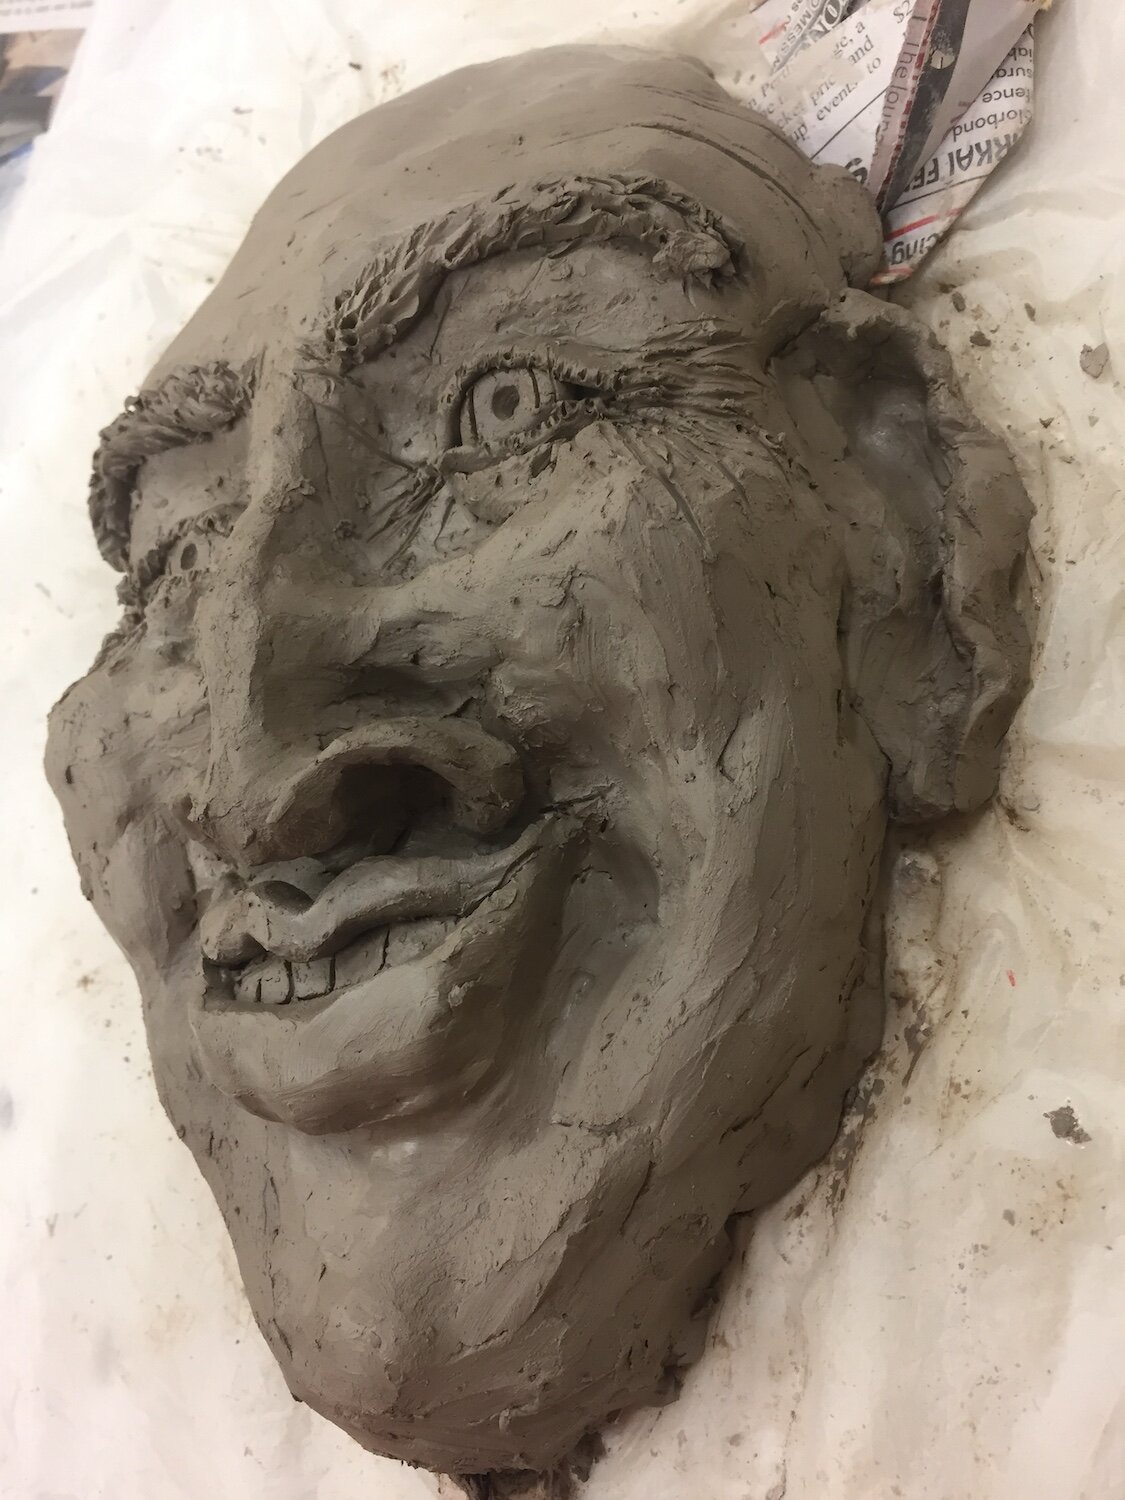 Professional Development Activity Away Day, Perth, Disgust Expression of Emotion, Clay Sculpture